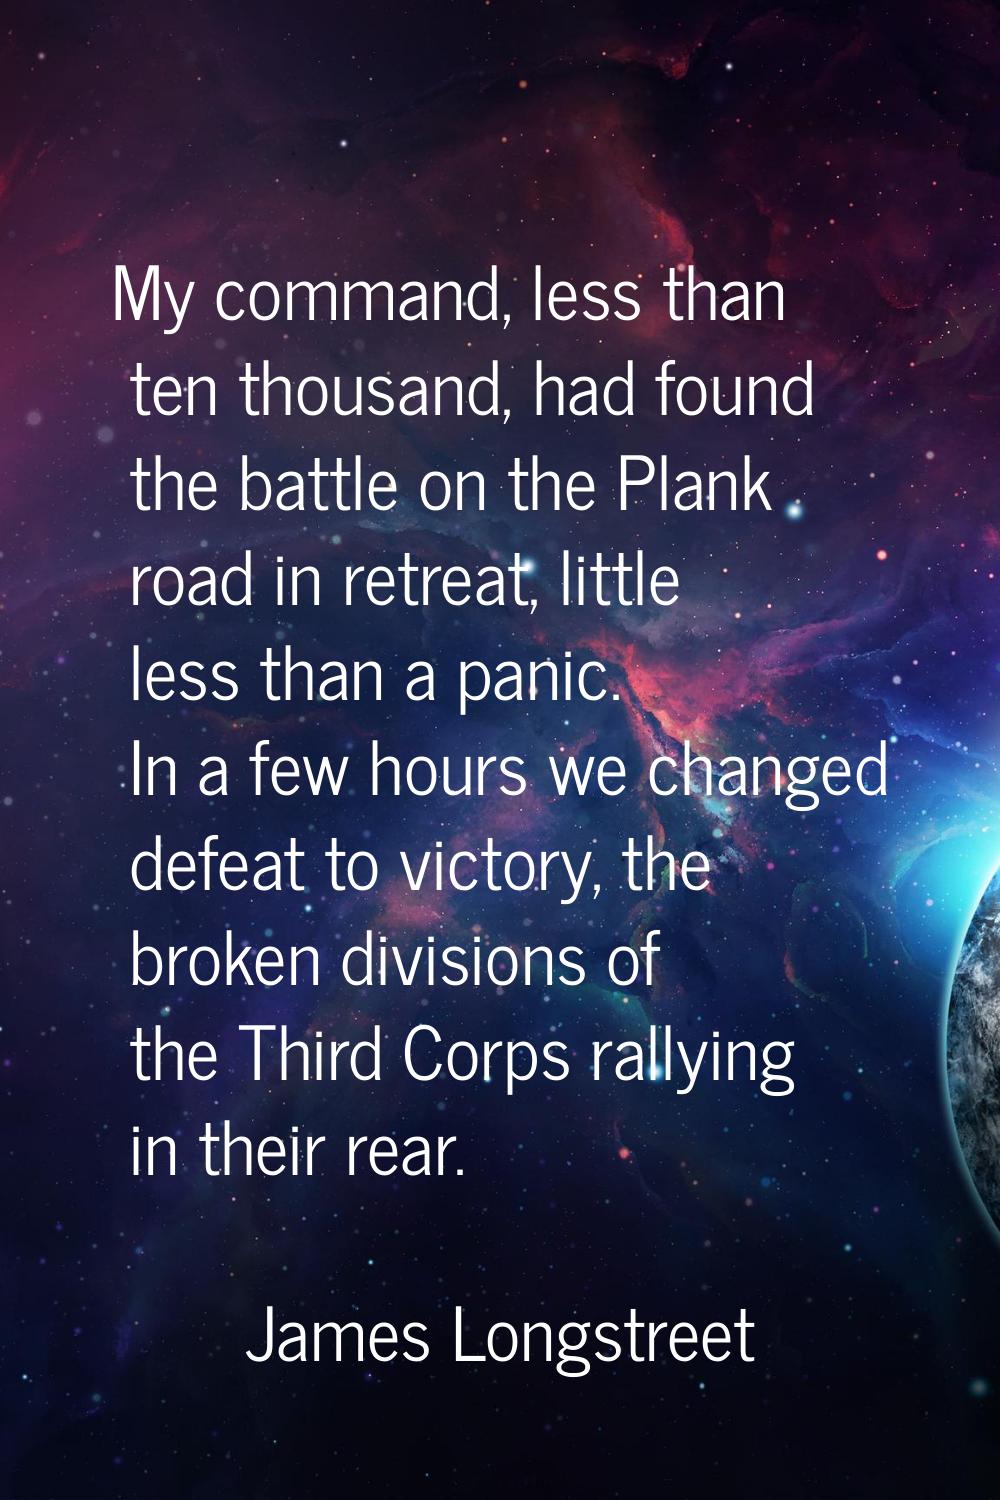 My command, less than ten thousand, had found the battle on the Plank road in retreat, little less 